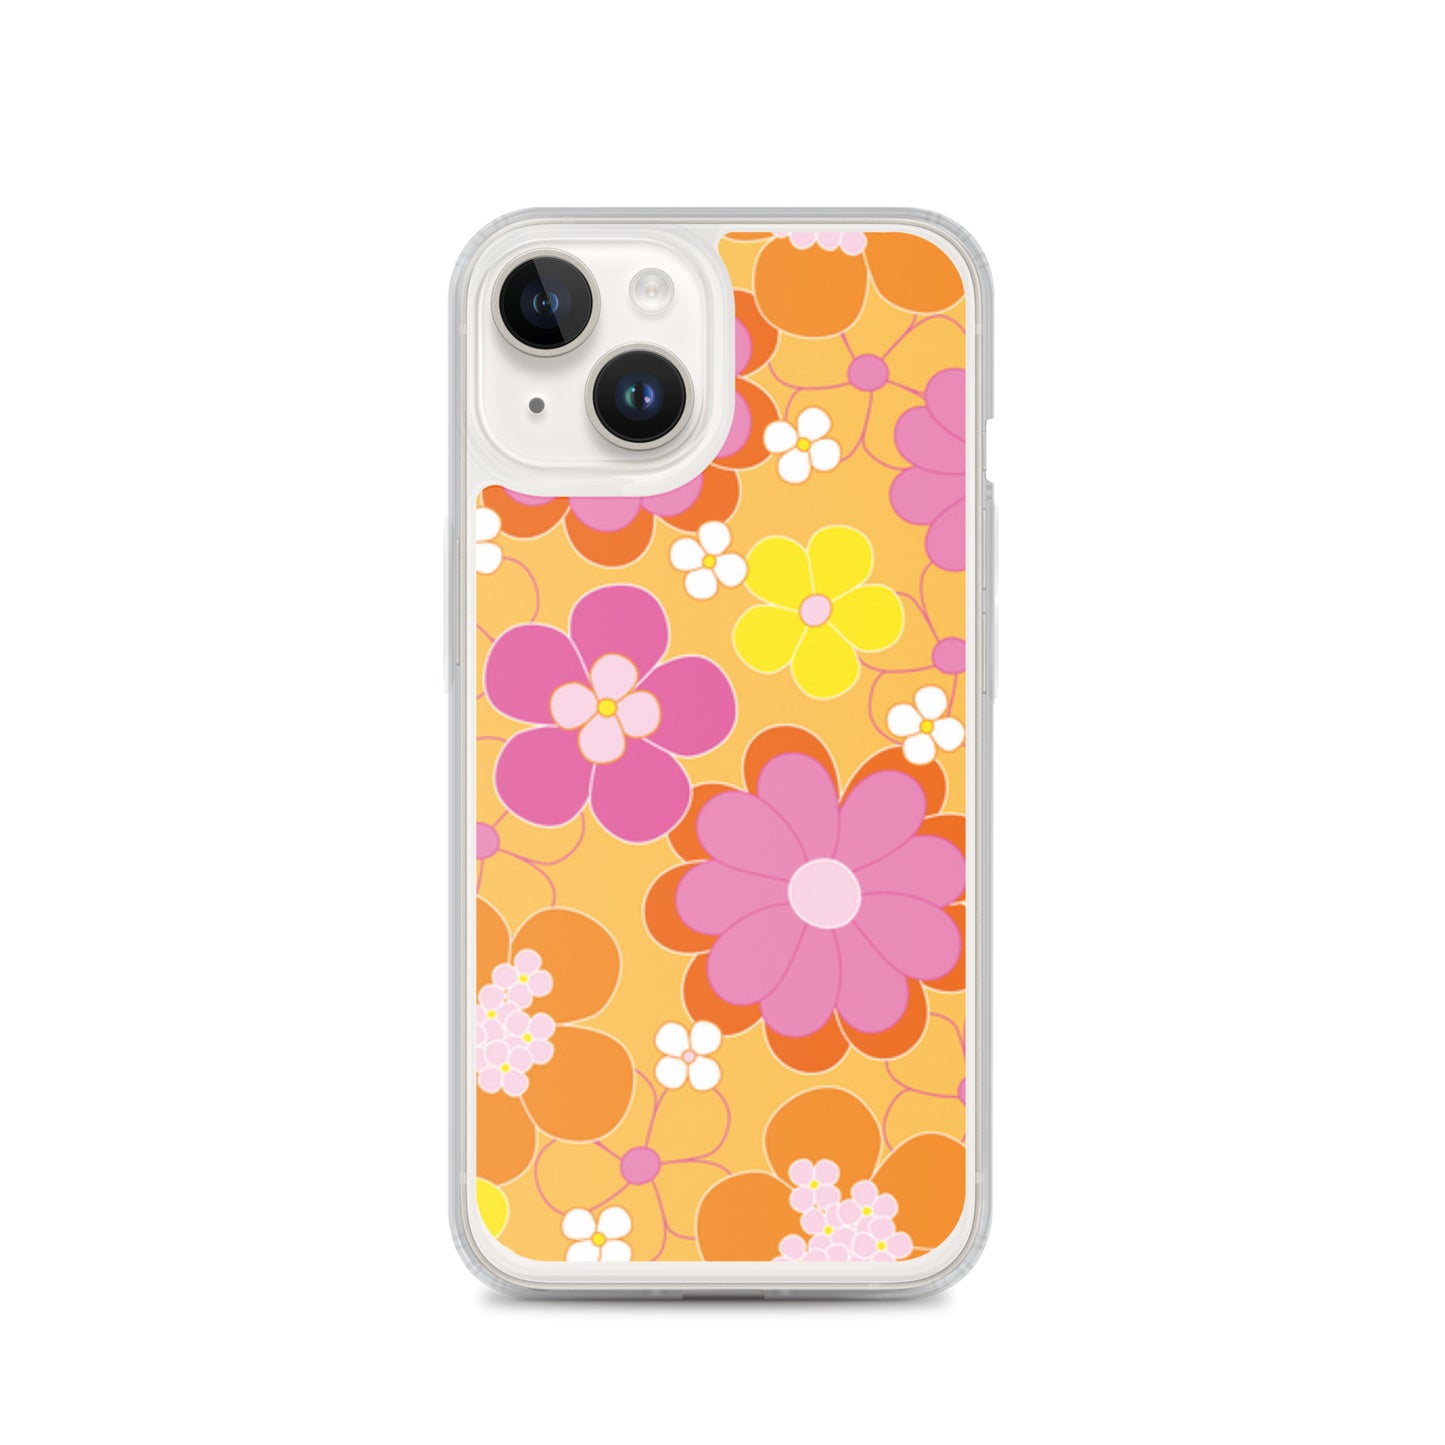 RAY OF FLOWERS - iPHONE CASE